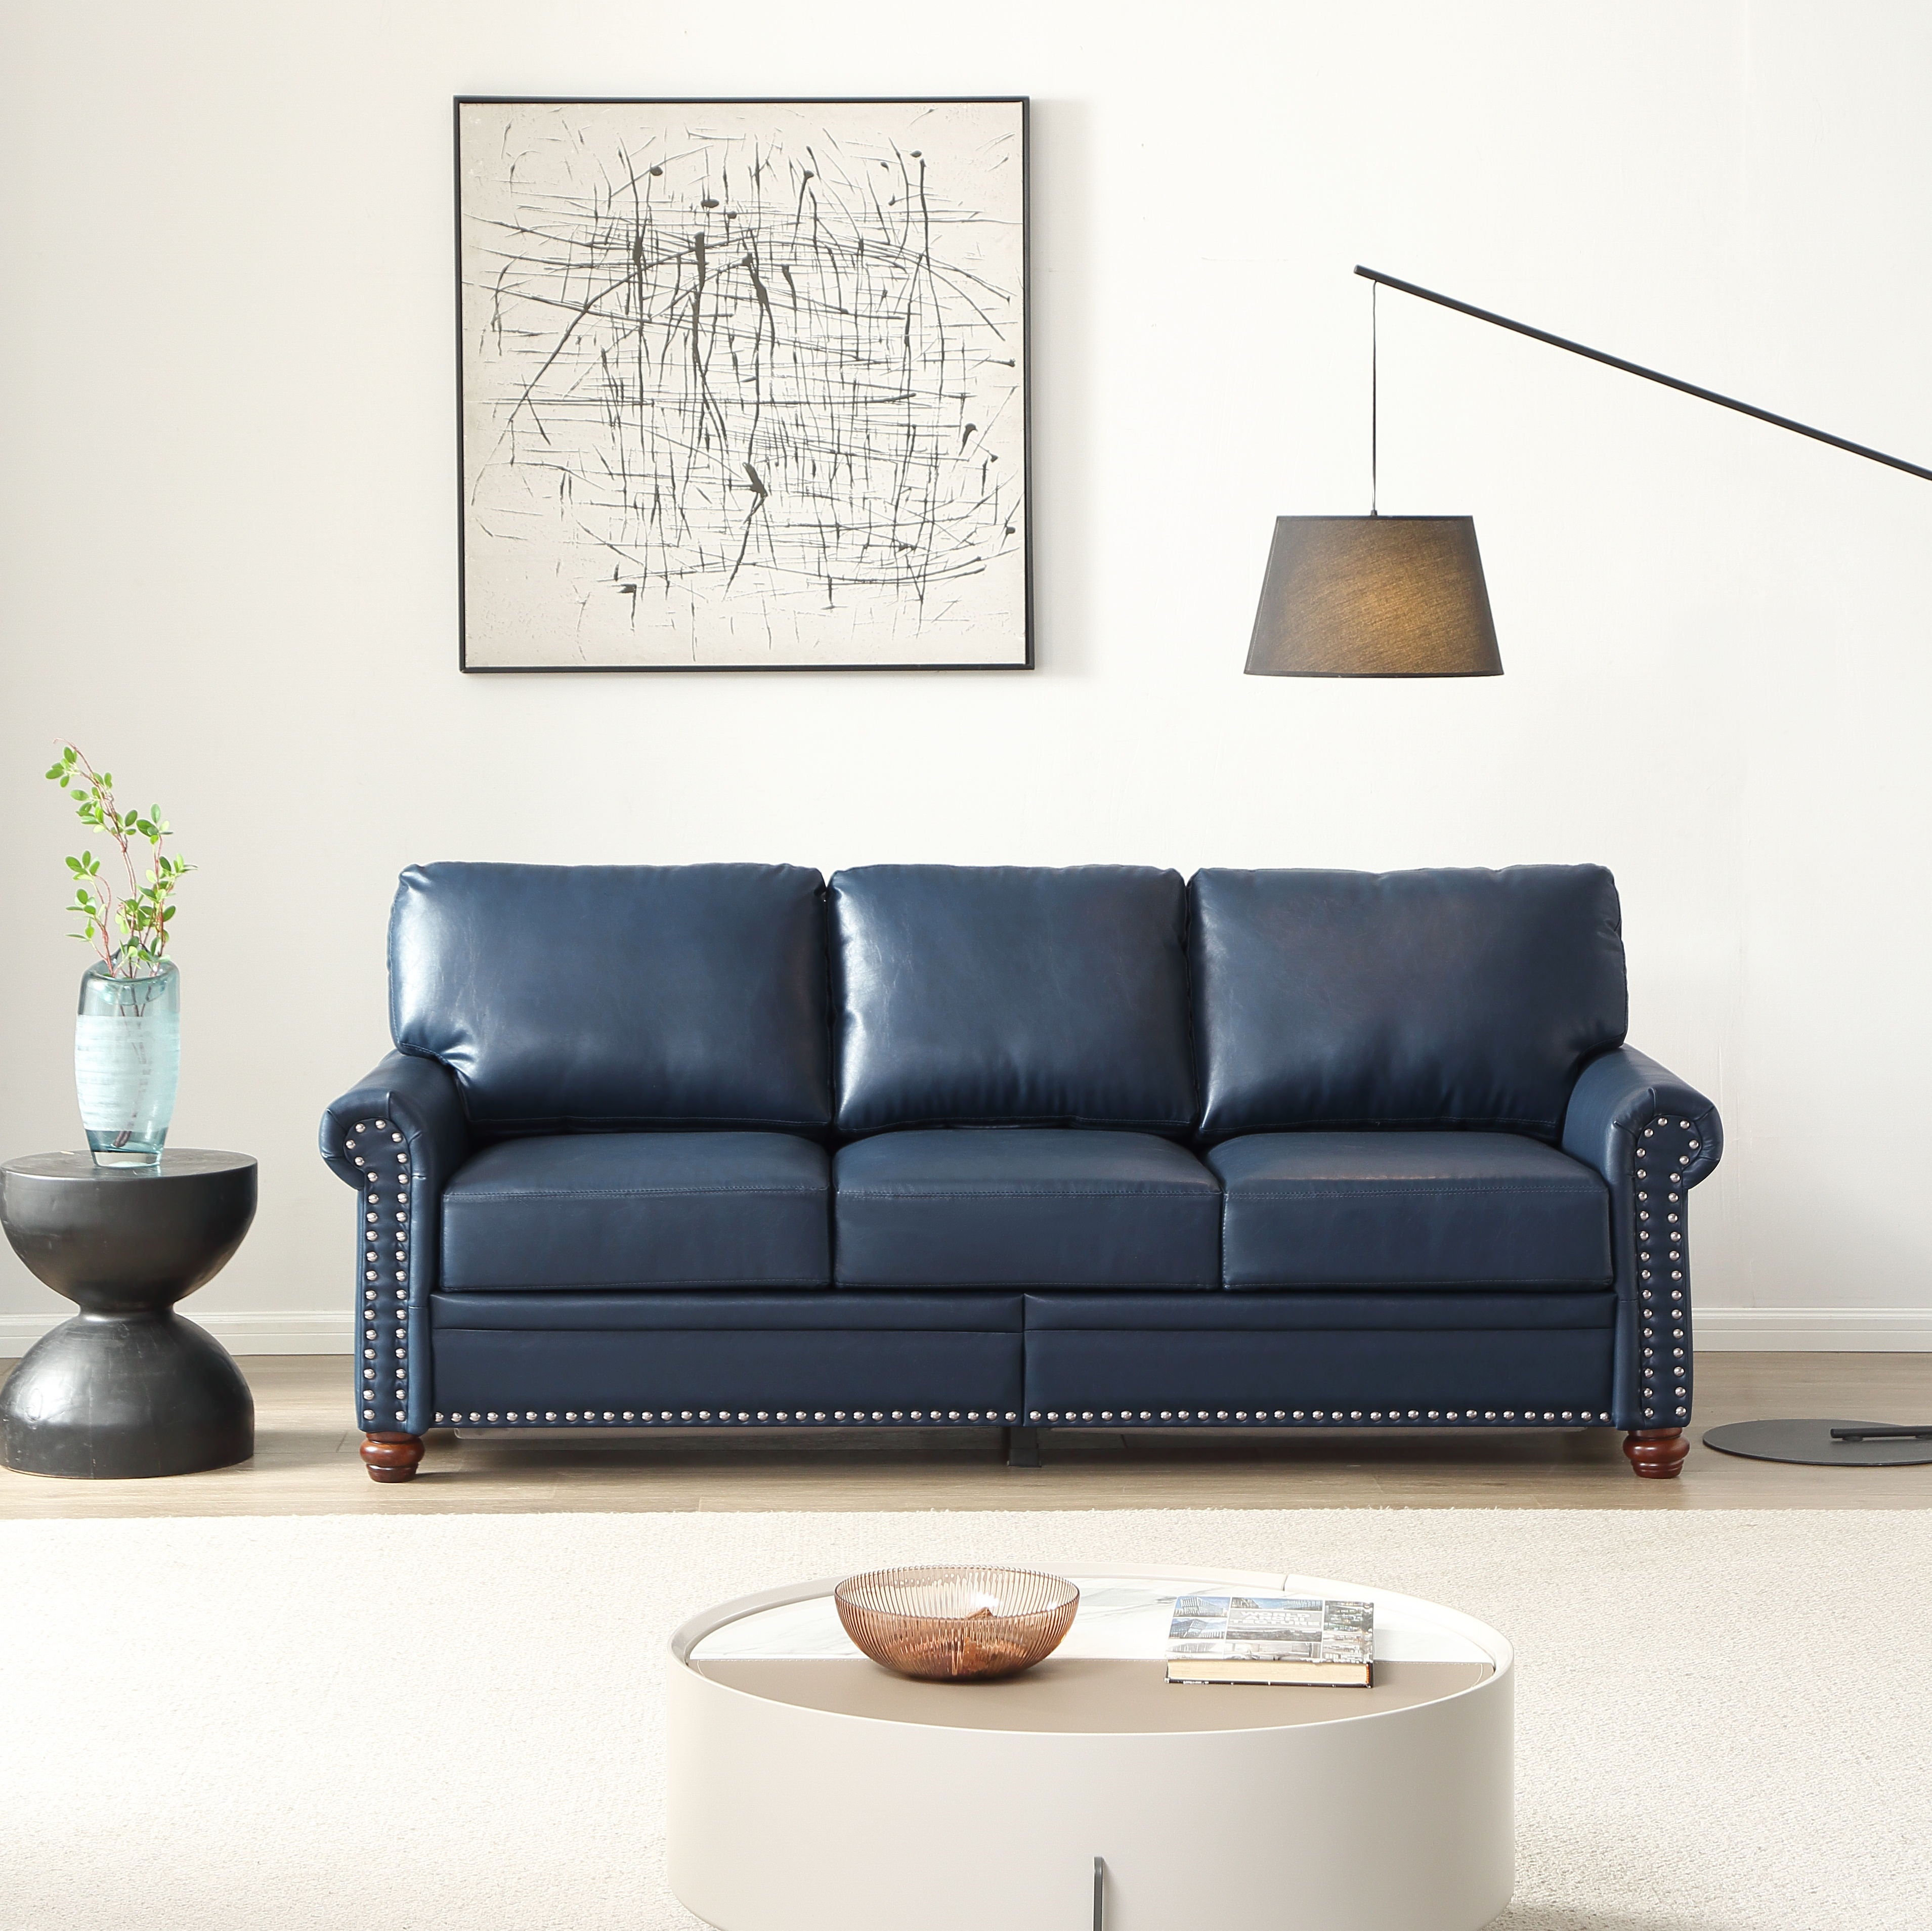 Classic Living Room Nails Sofa Navy Blue Faux Leather